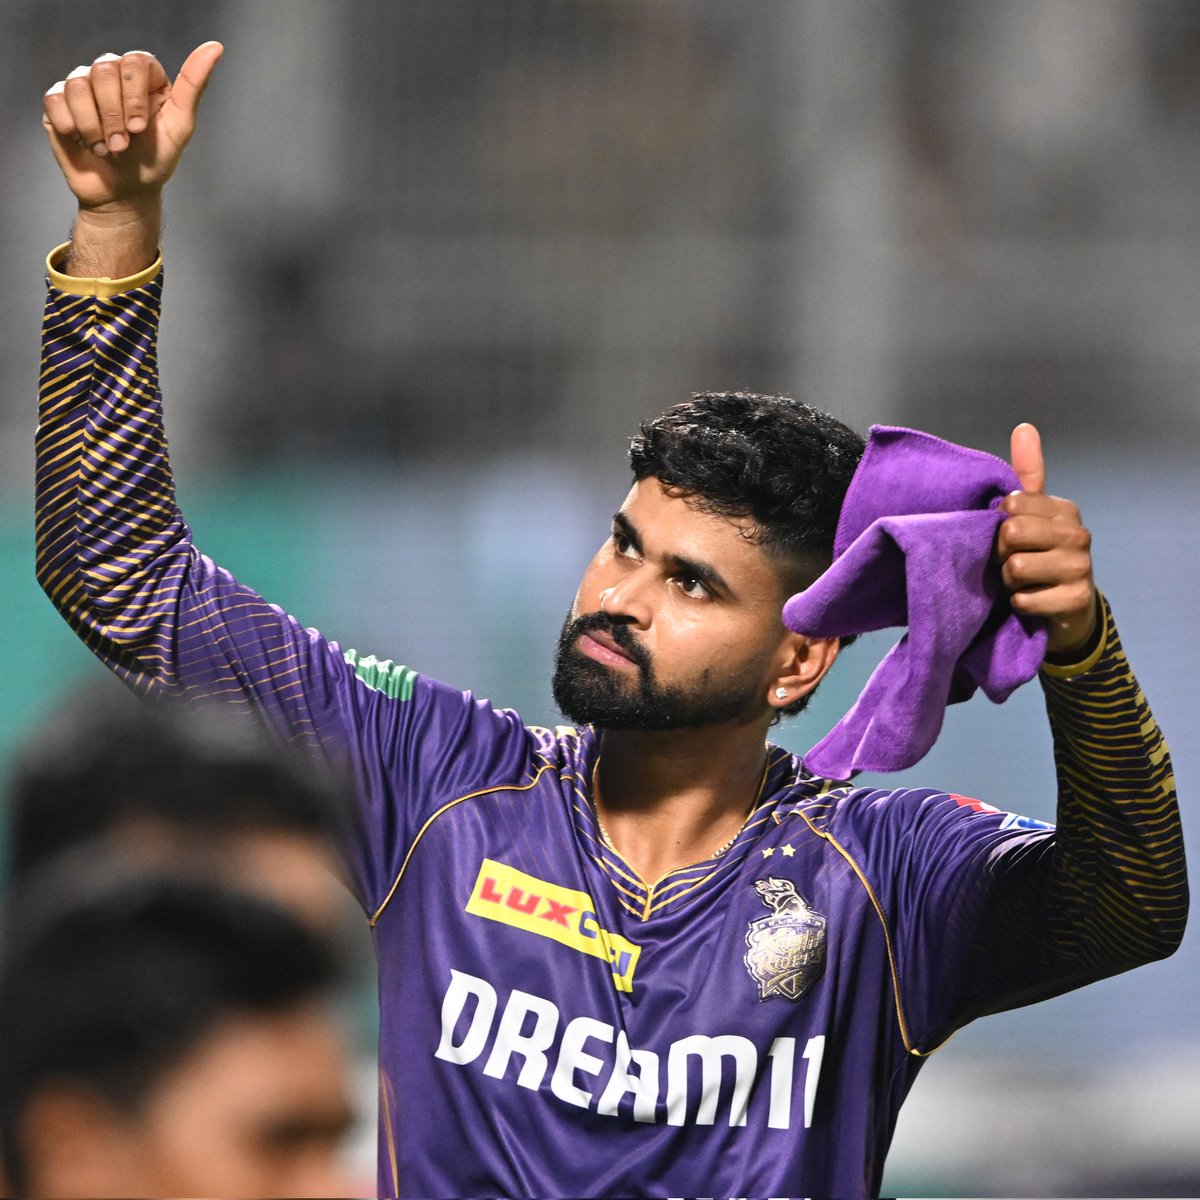 - Qualified into the final. 
- 9 wins in league stage. 
- KKR top of the Points table for the first time. 
- Highest NRR ever in IPL history.
- 58*(24) in Qualifier 1.

TAKE A BOW, CAPTAIN SHREYAS IYER. 💪